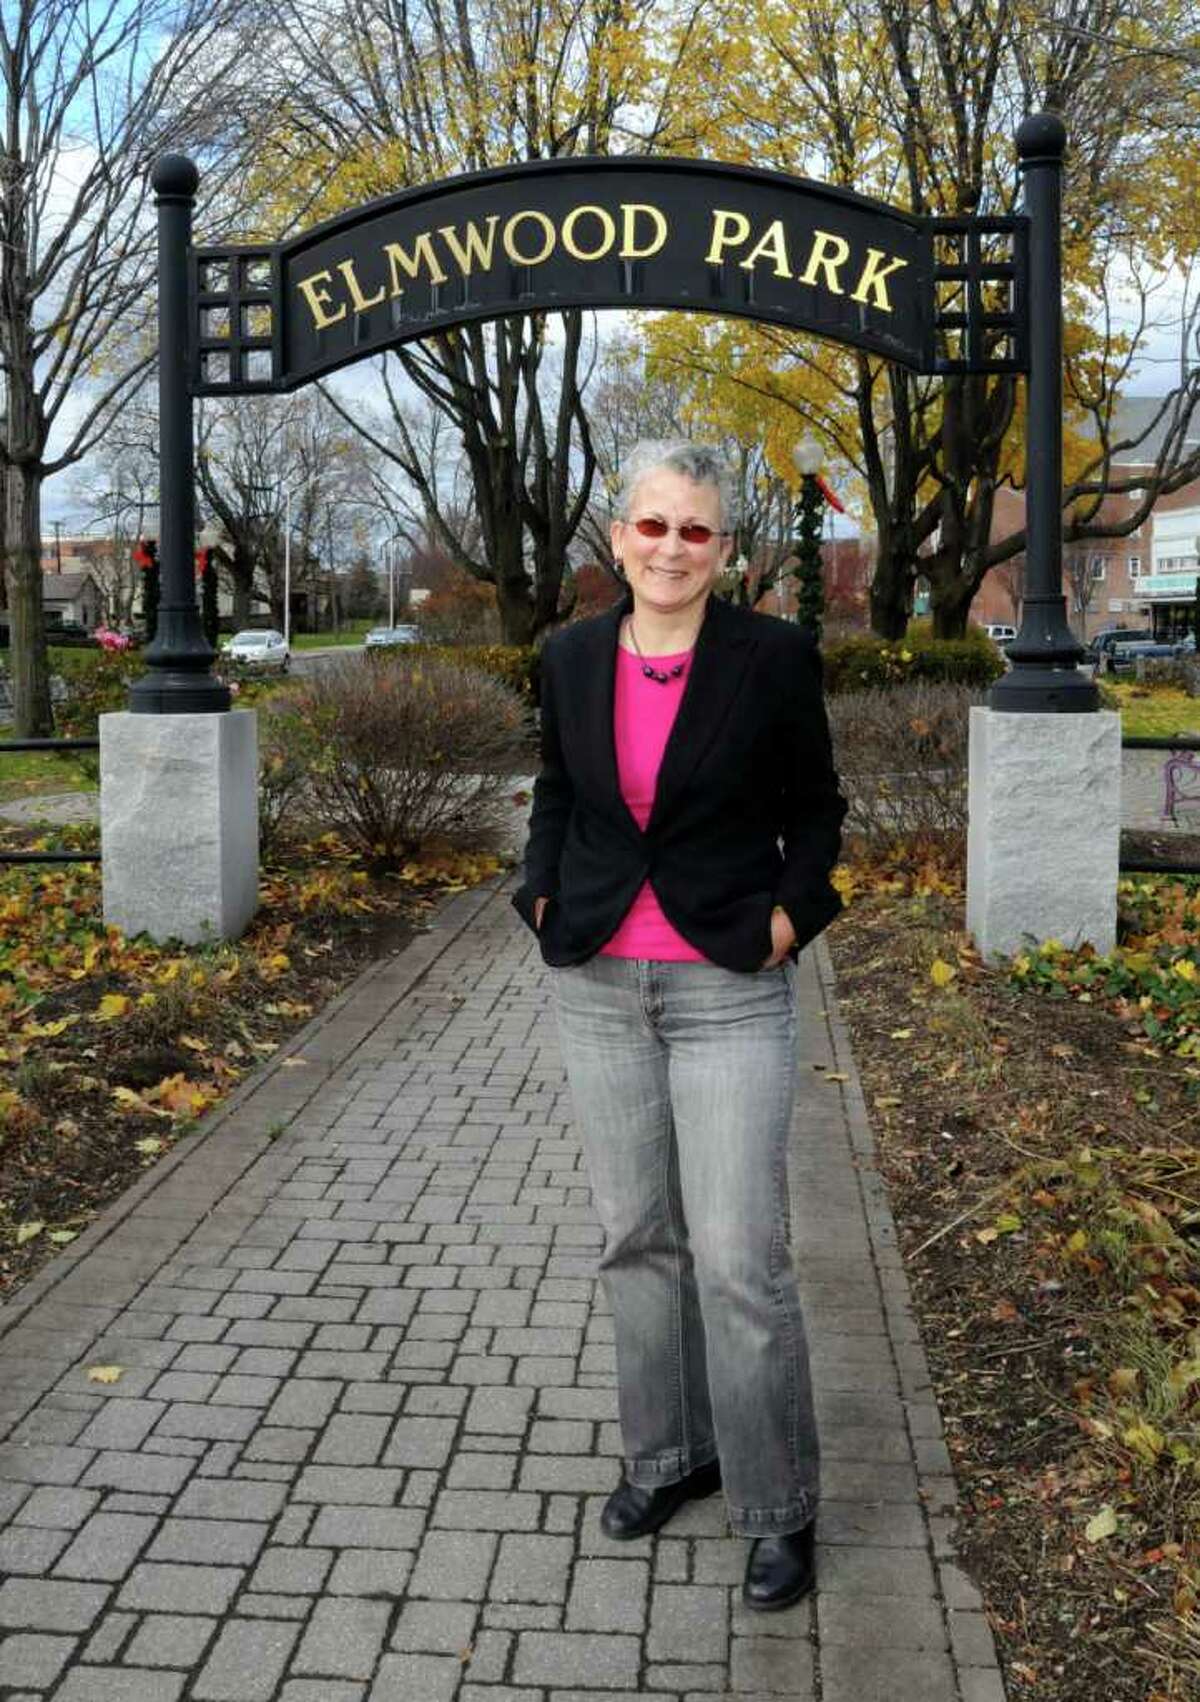 Jane Didona of Didona Associates is a landscape architect. Didona designs parks and outdoor spaces. Didona designed Elmwood Park in dowtown Danbury. Pictured here on Wed. Nov. 17, 2010 at the park.